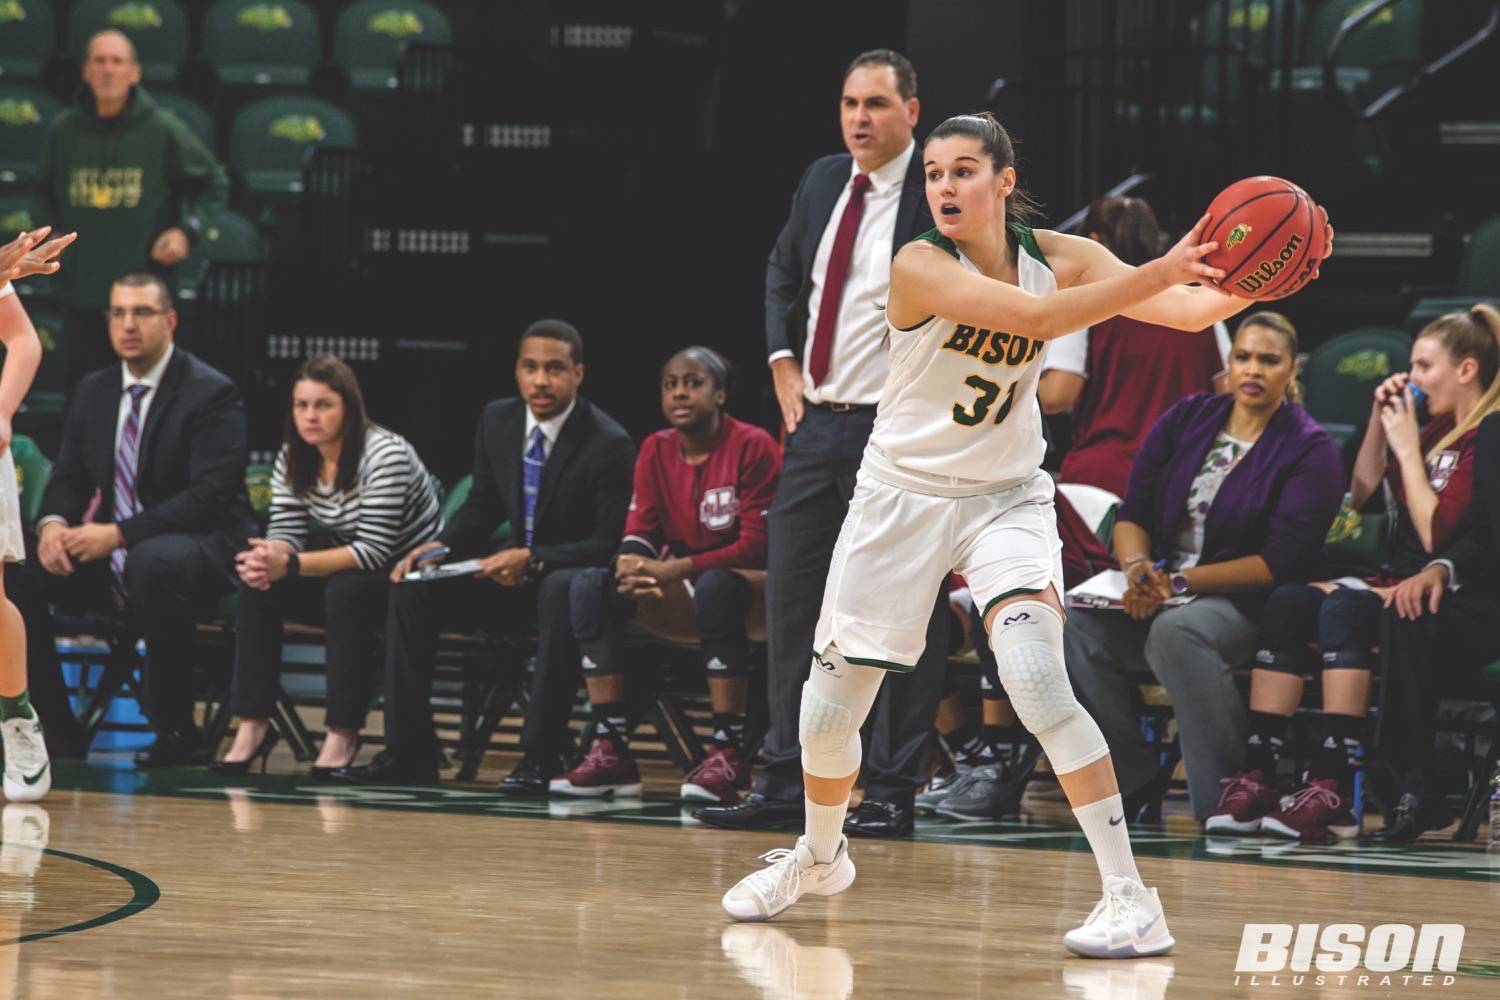 Are You A Bison Women's Basketball Scholar?